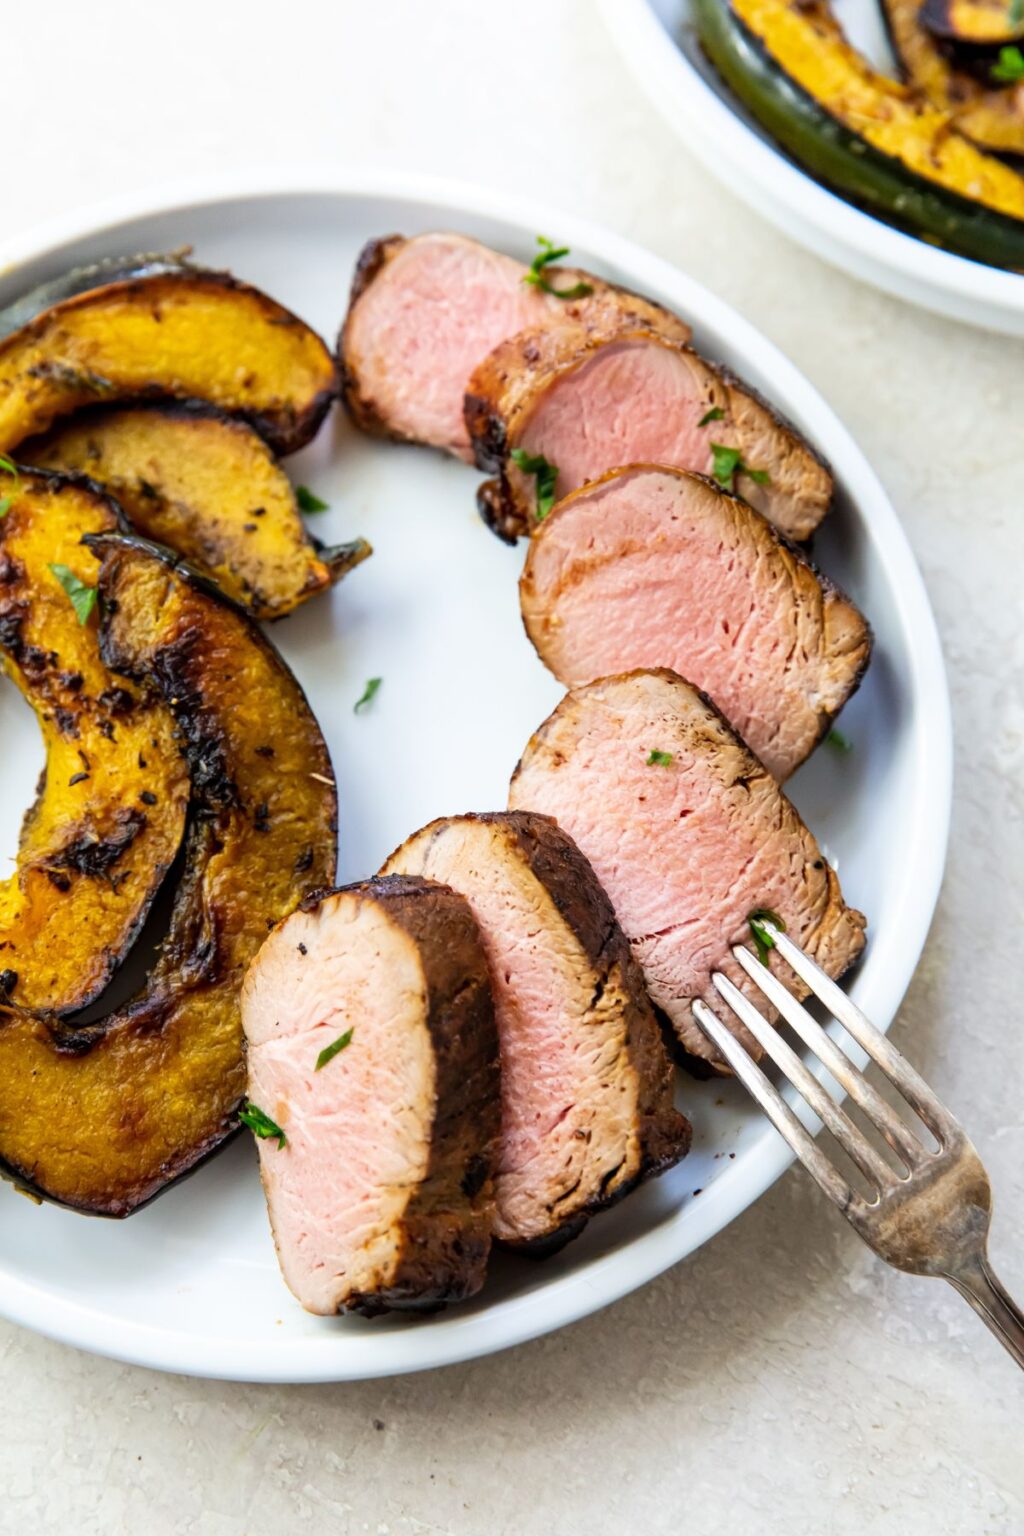 Blackstone Pork Tenderloin with squash and parsley on a white plate with a fork